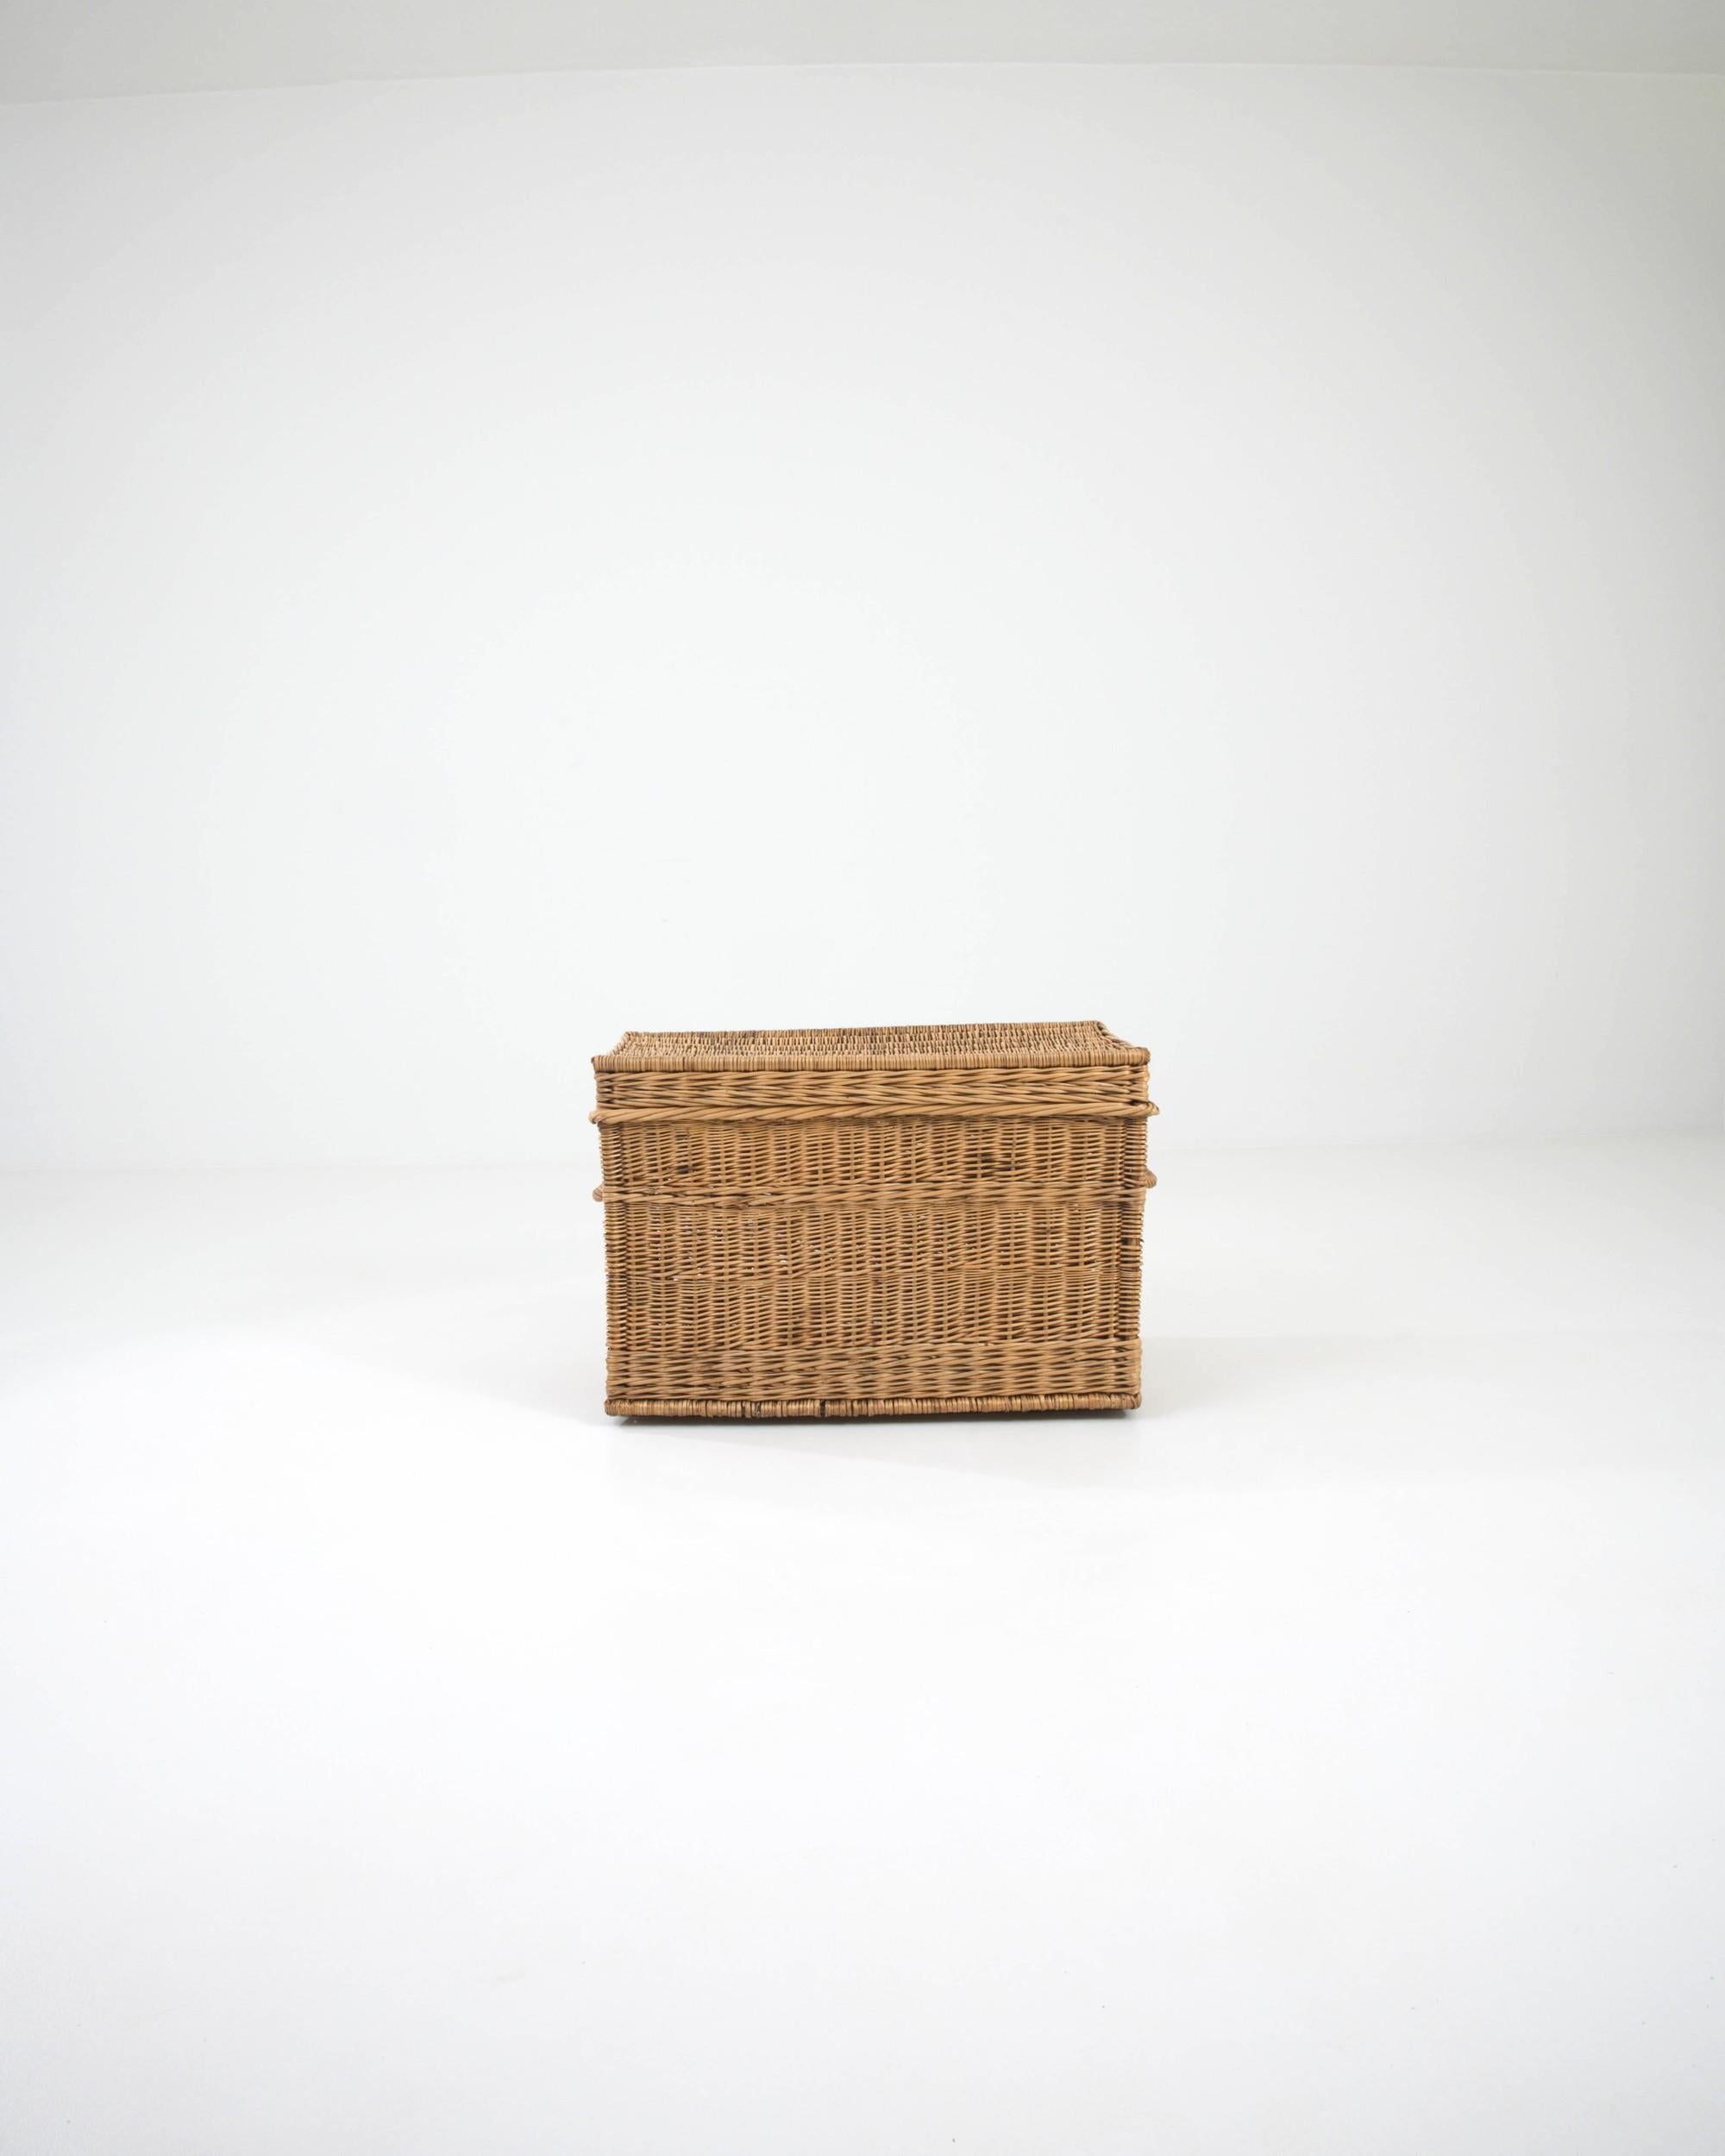 This charming and practical trunk is crafted from woven wicker, celebrated for its strength and flexibility. The intricate pattern serves both an aesthetic and functional purpose, enhancing the trunk's durability. The chest features a hinged lid